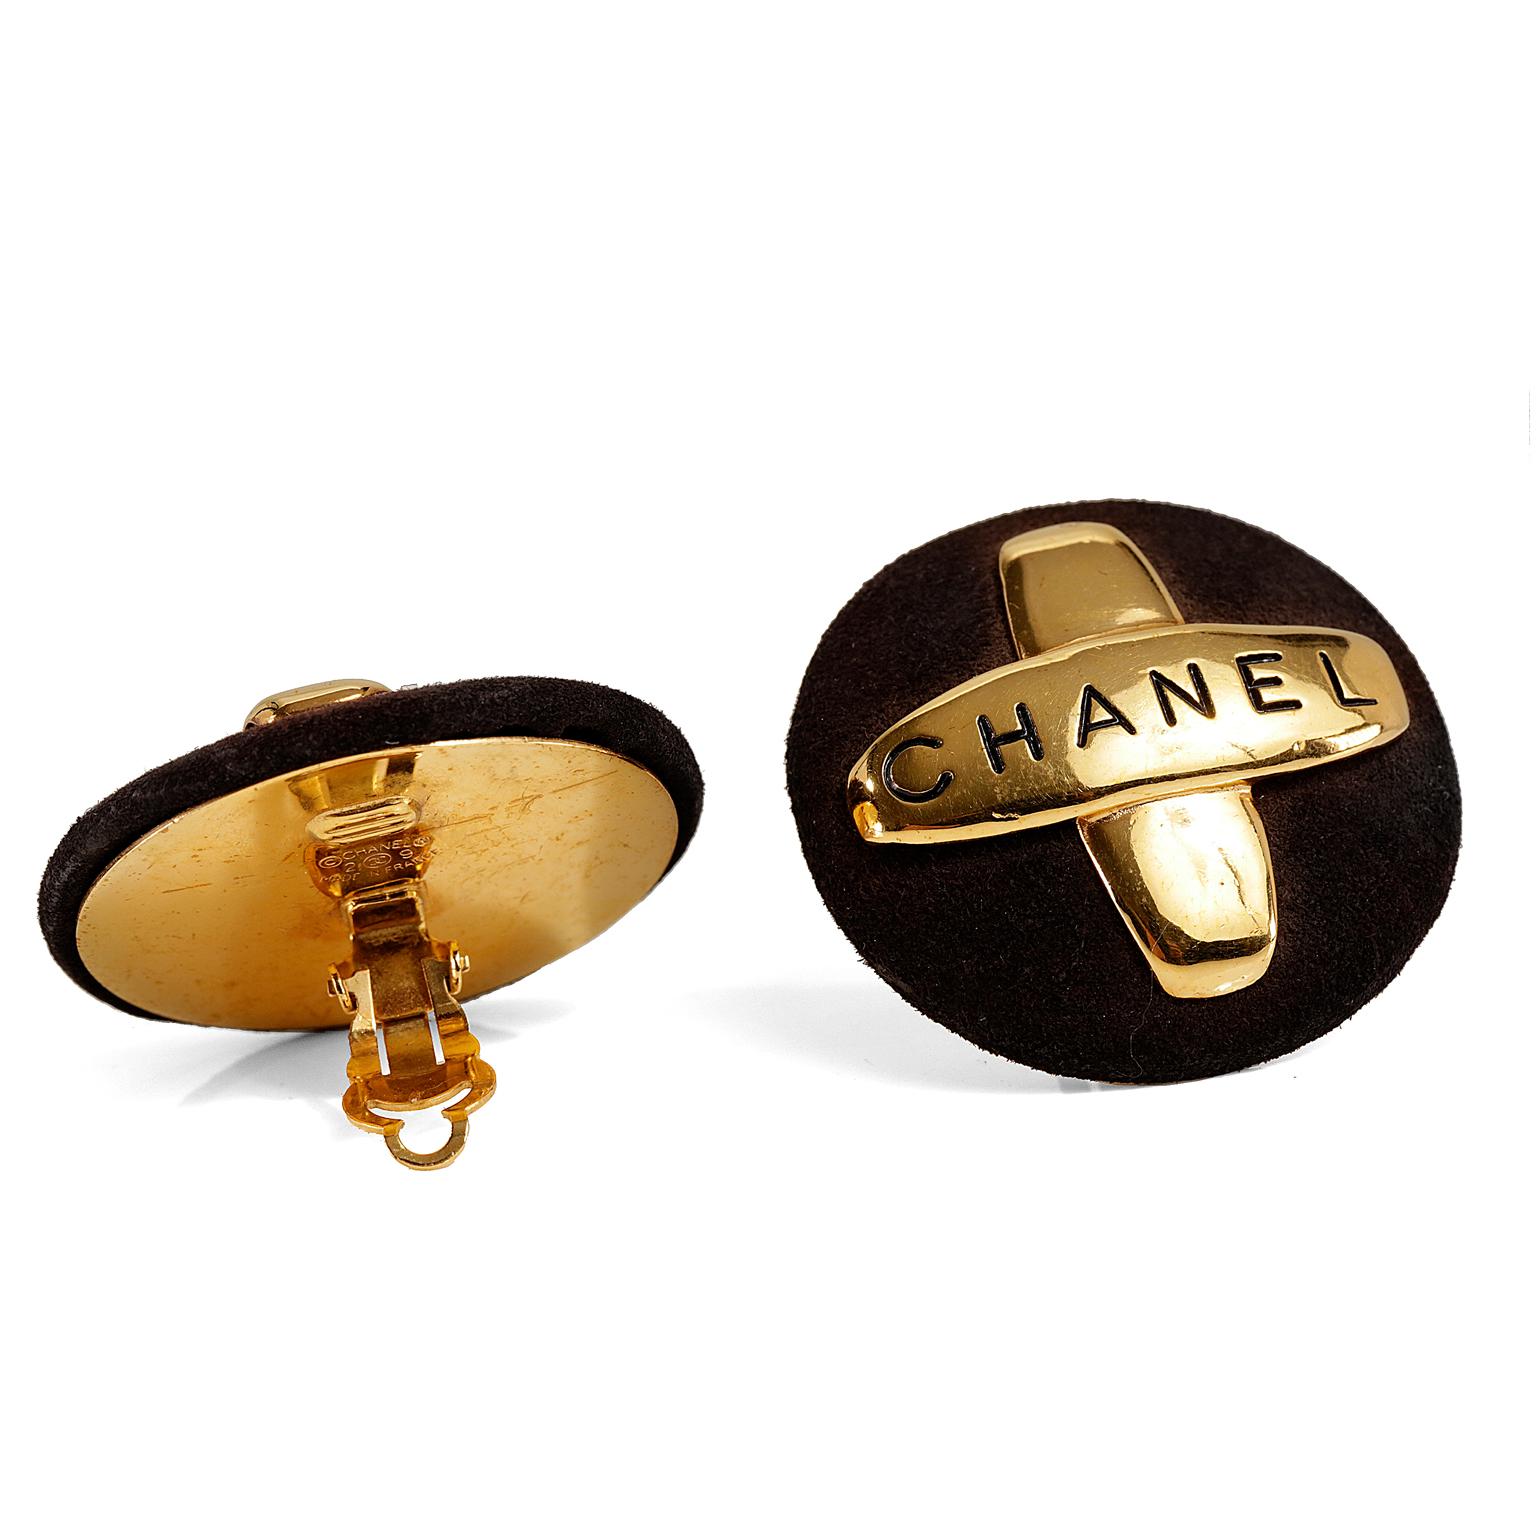 These authentic Chanel Brown Suede Maltese Cross Large Earrings are in very good condition from the season 29 collection, early 1990’s.  Black suede button earrings with CHANEL engraved gold tone cross.  Clip on style.  Made in France.  Box or pouch